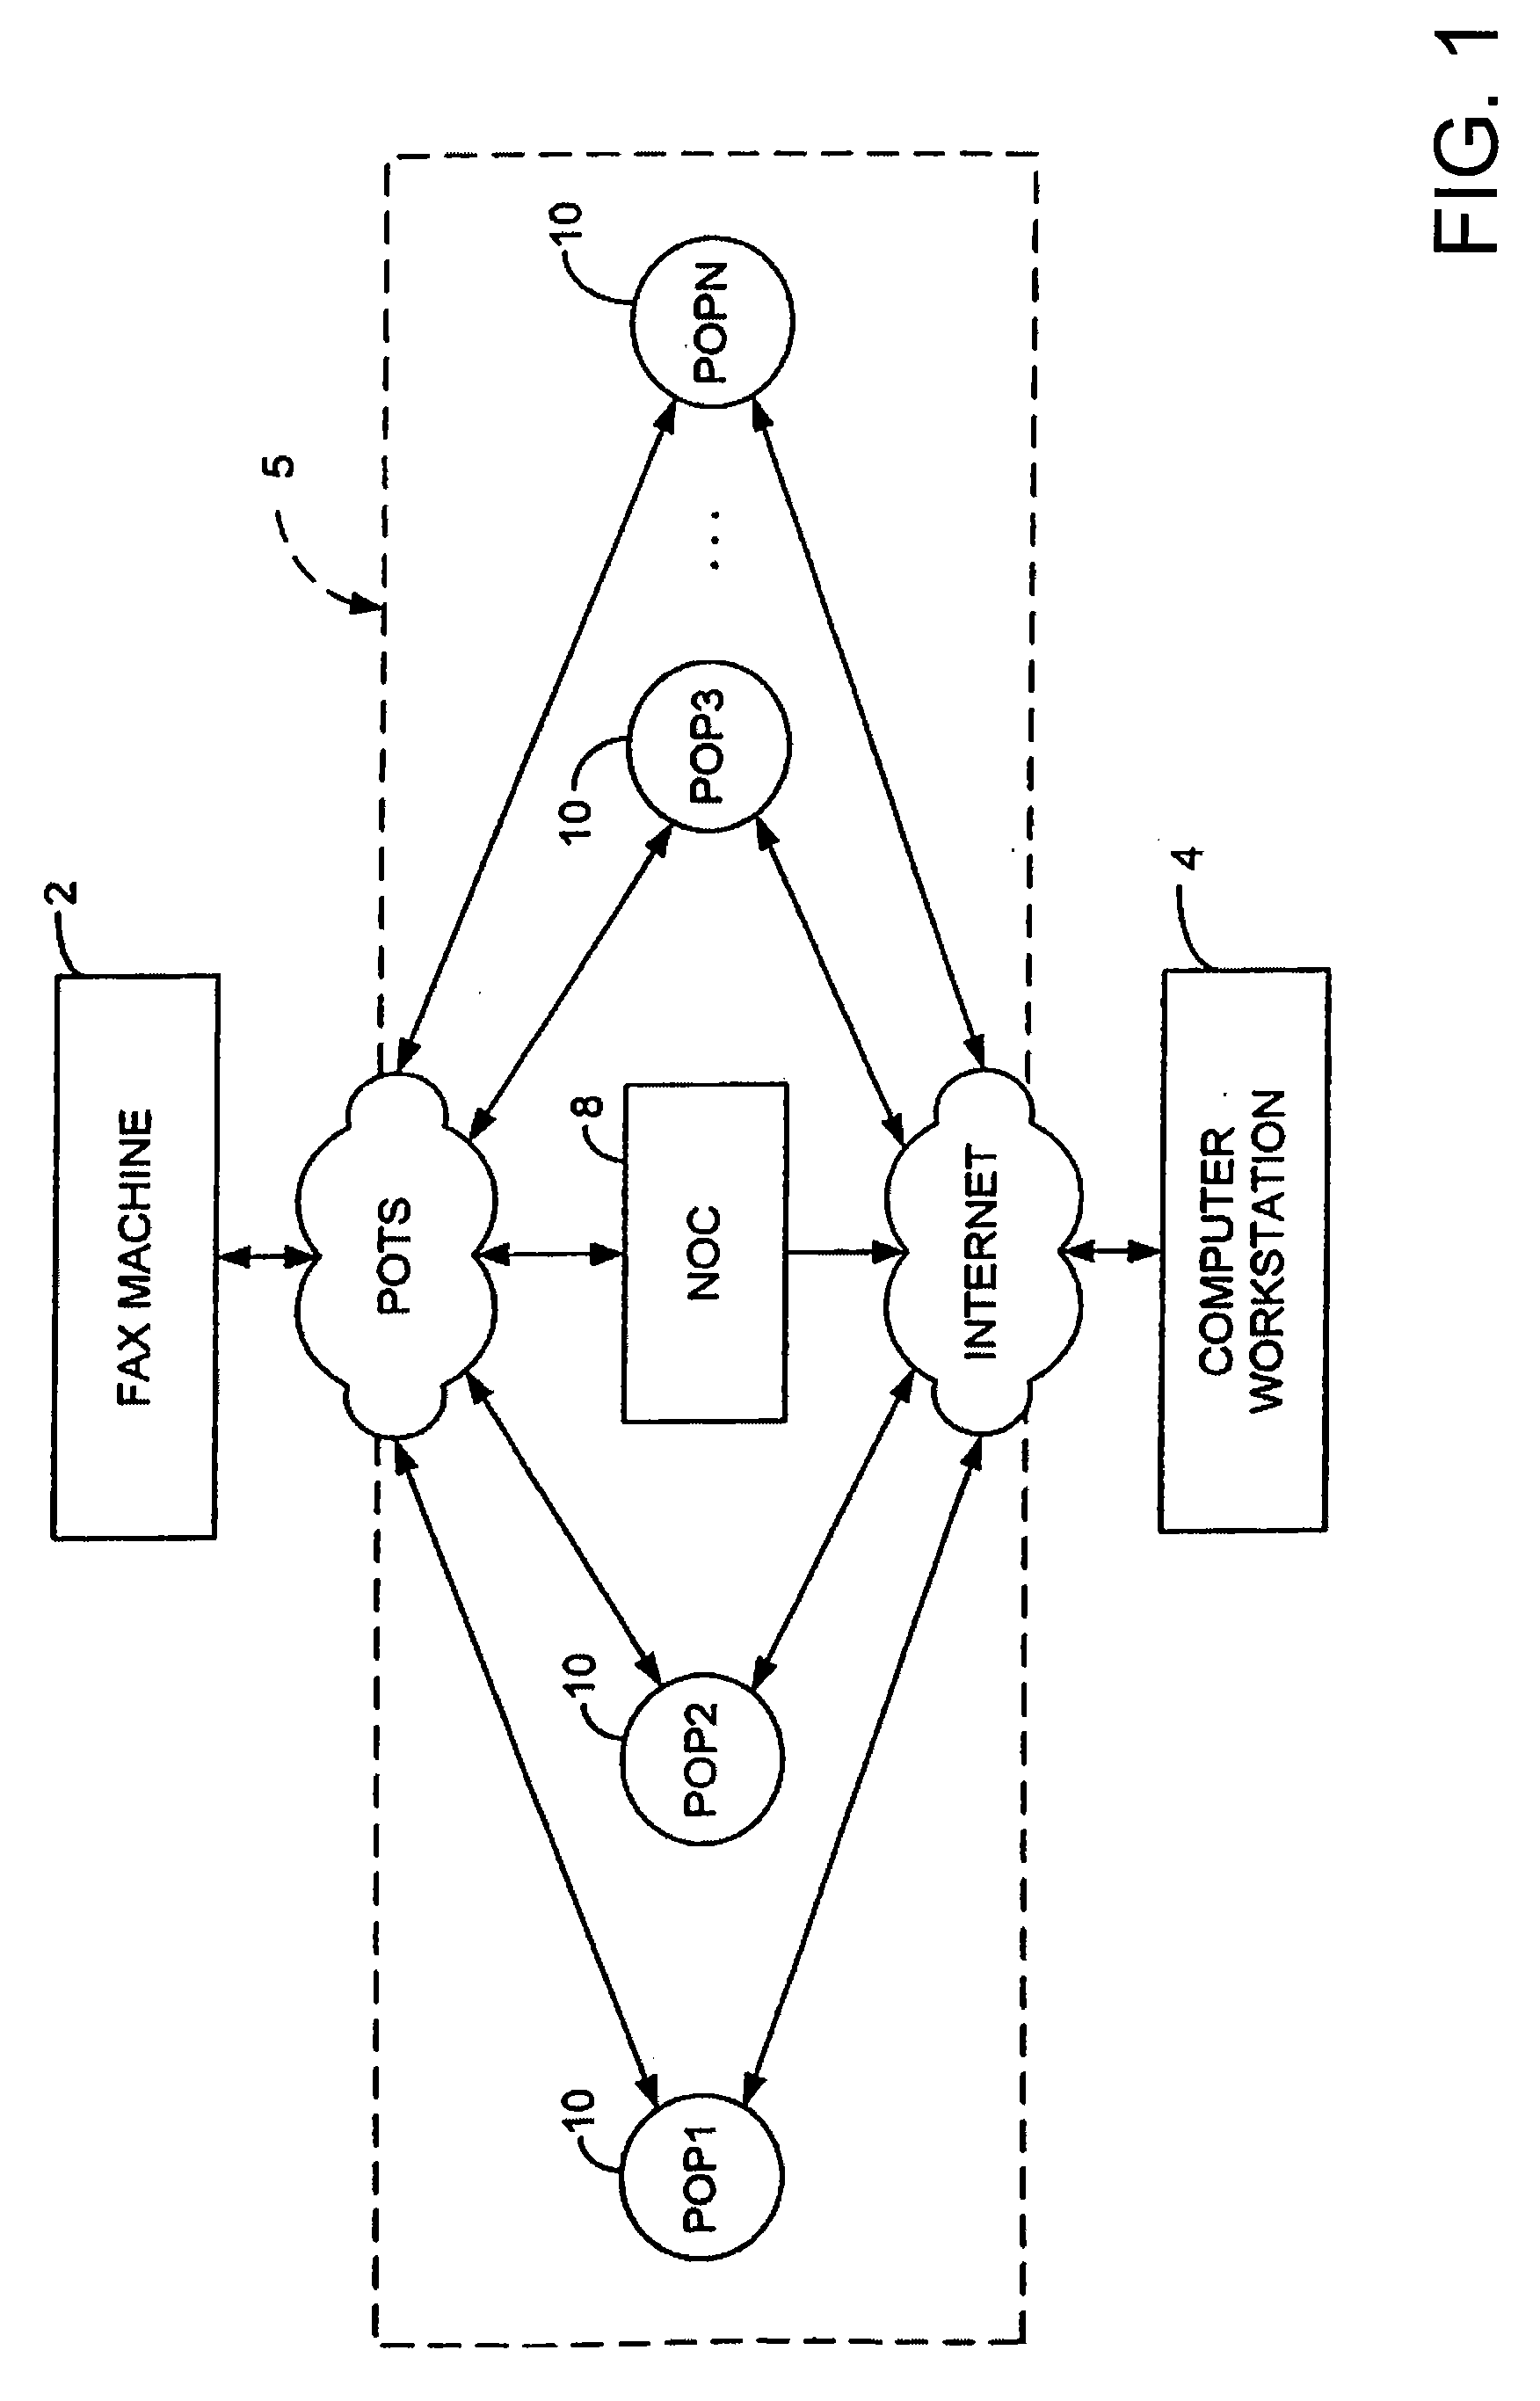 Methods and apparatus for manipulating and providing facsimile transmissions to electronic storage destinations